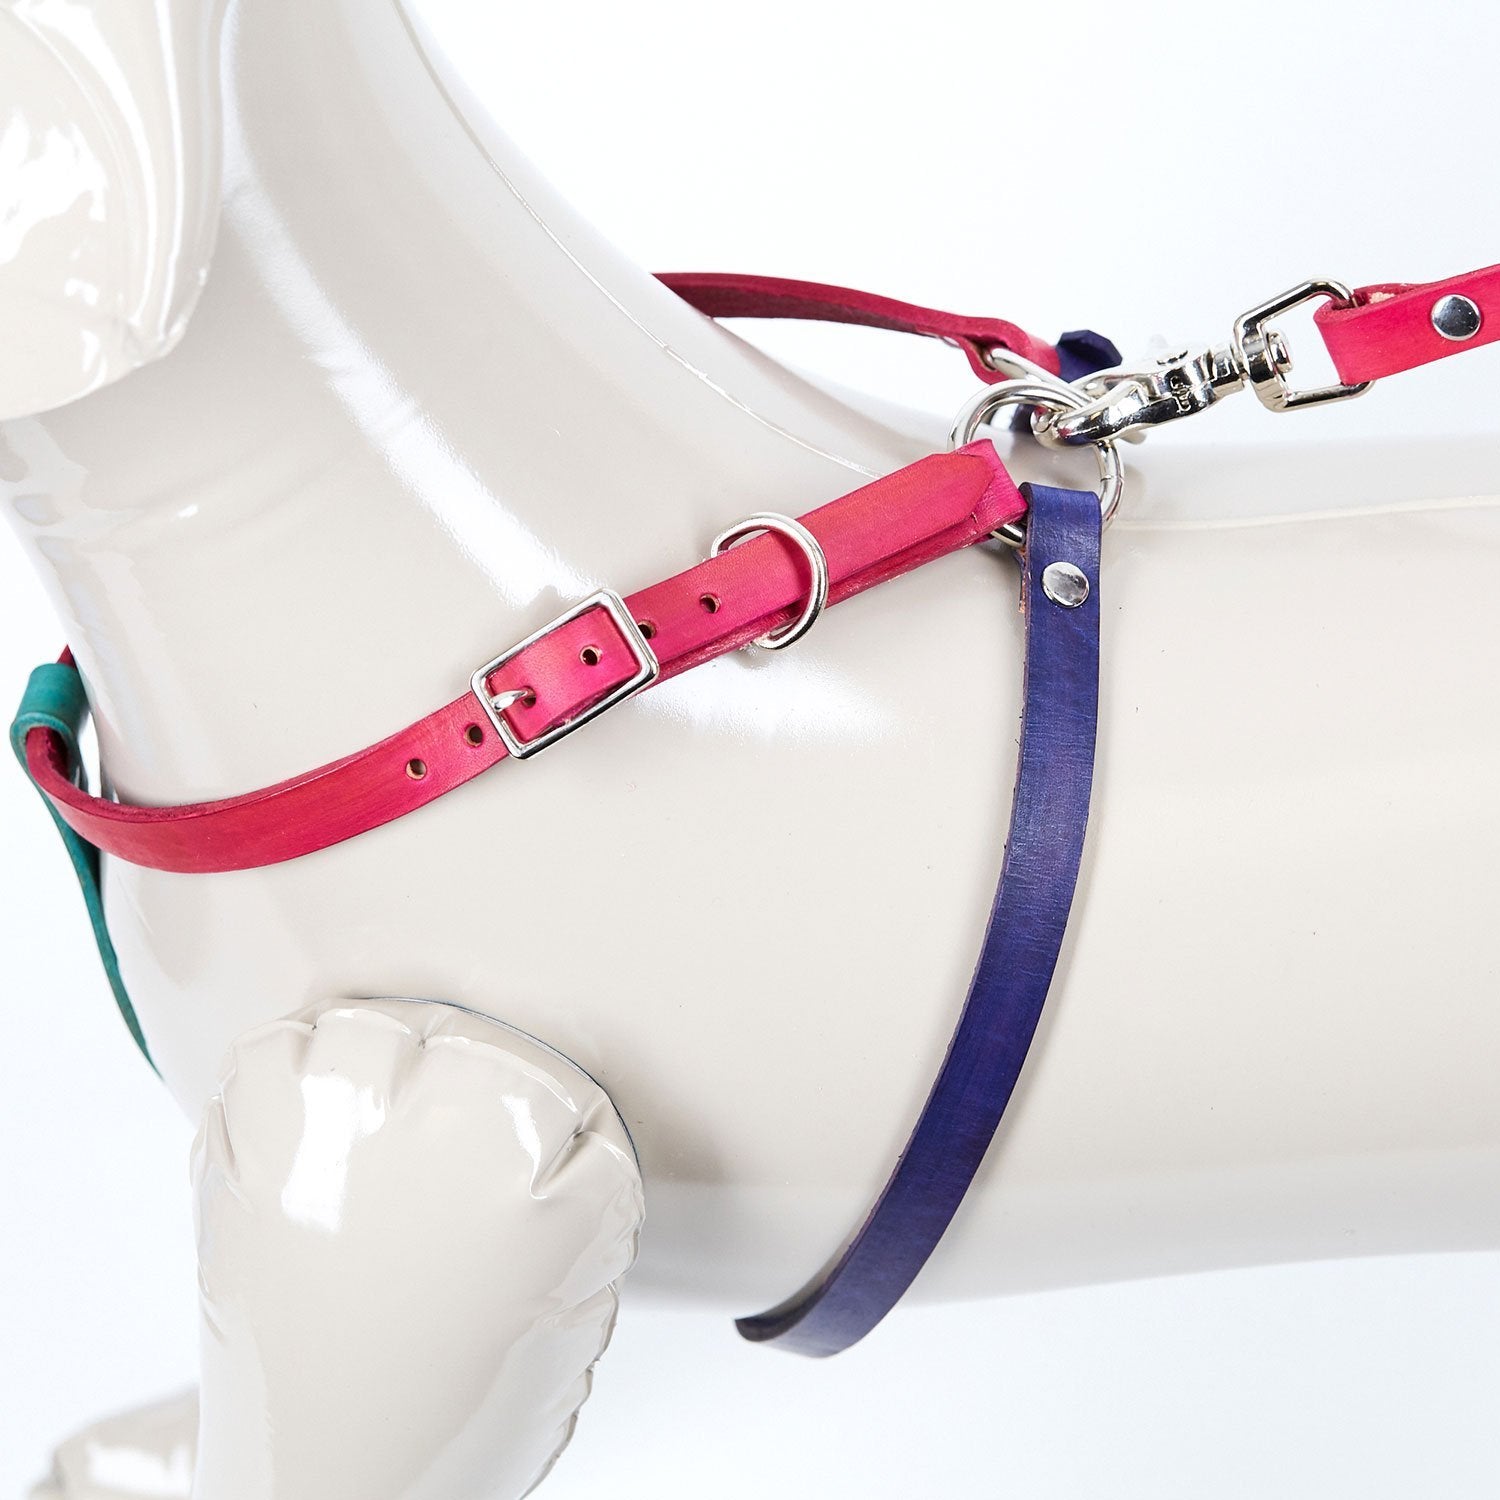 Medium Multi Colored Leather Dog Harness - Available in More Colors